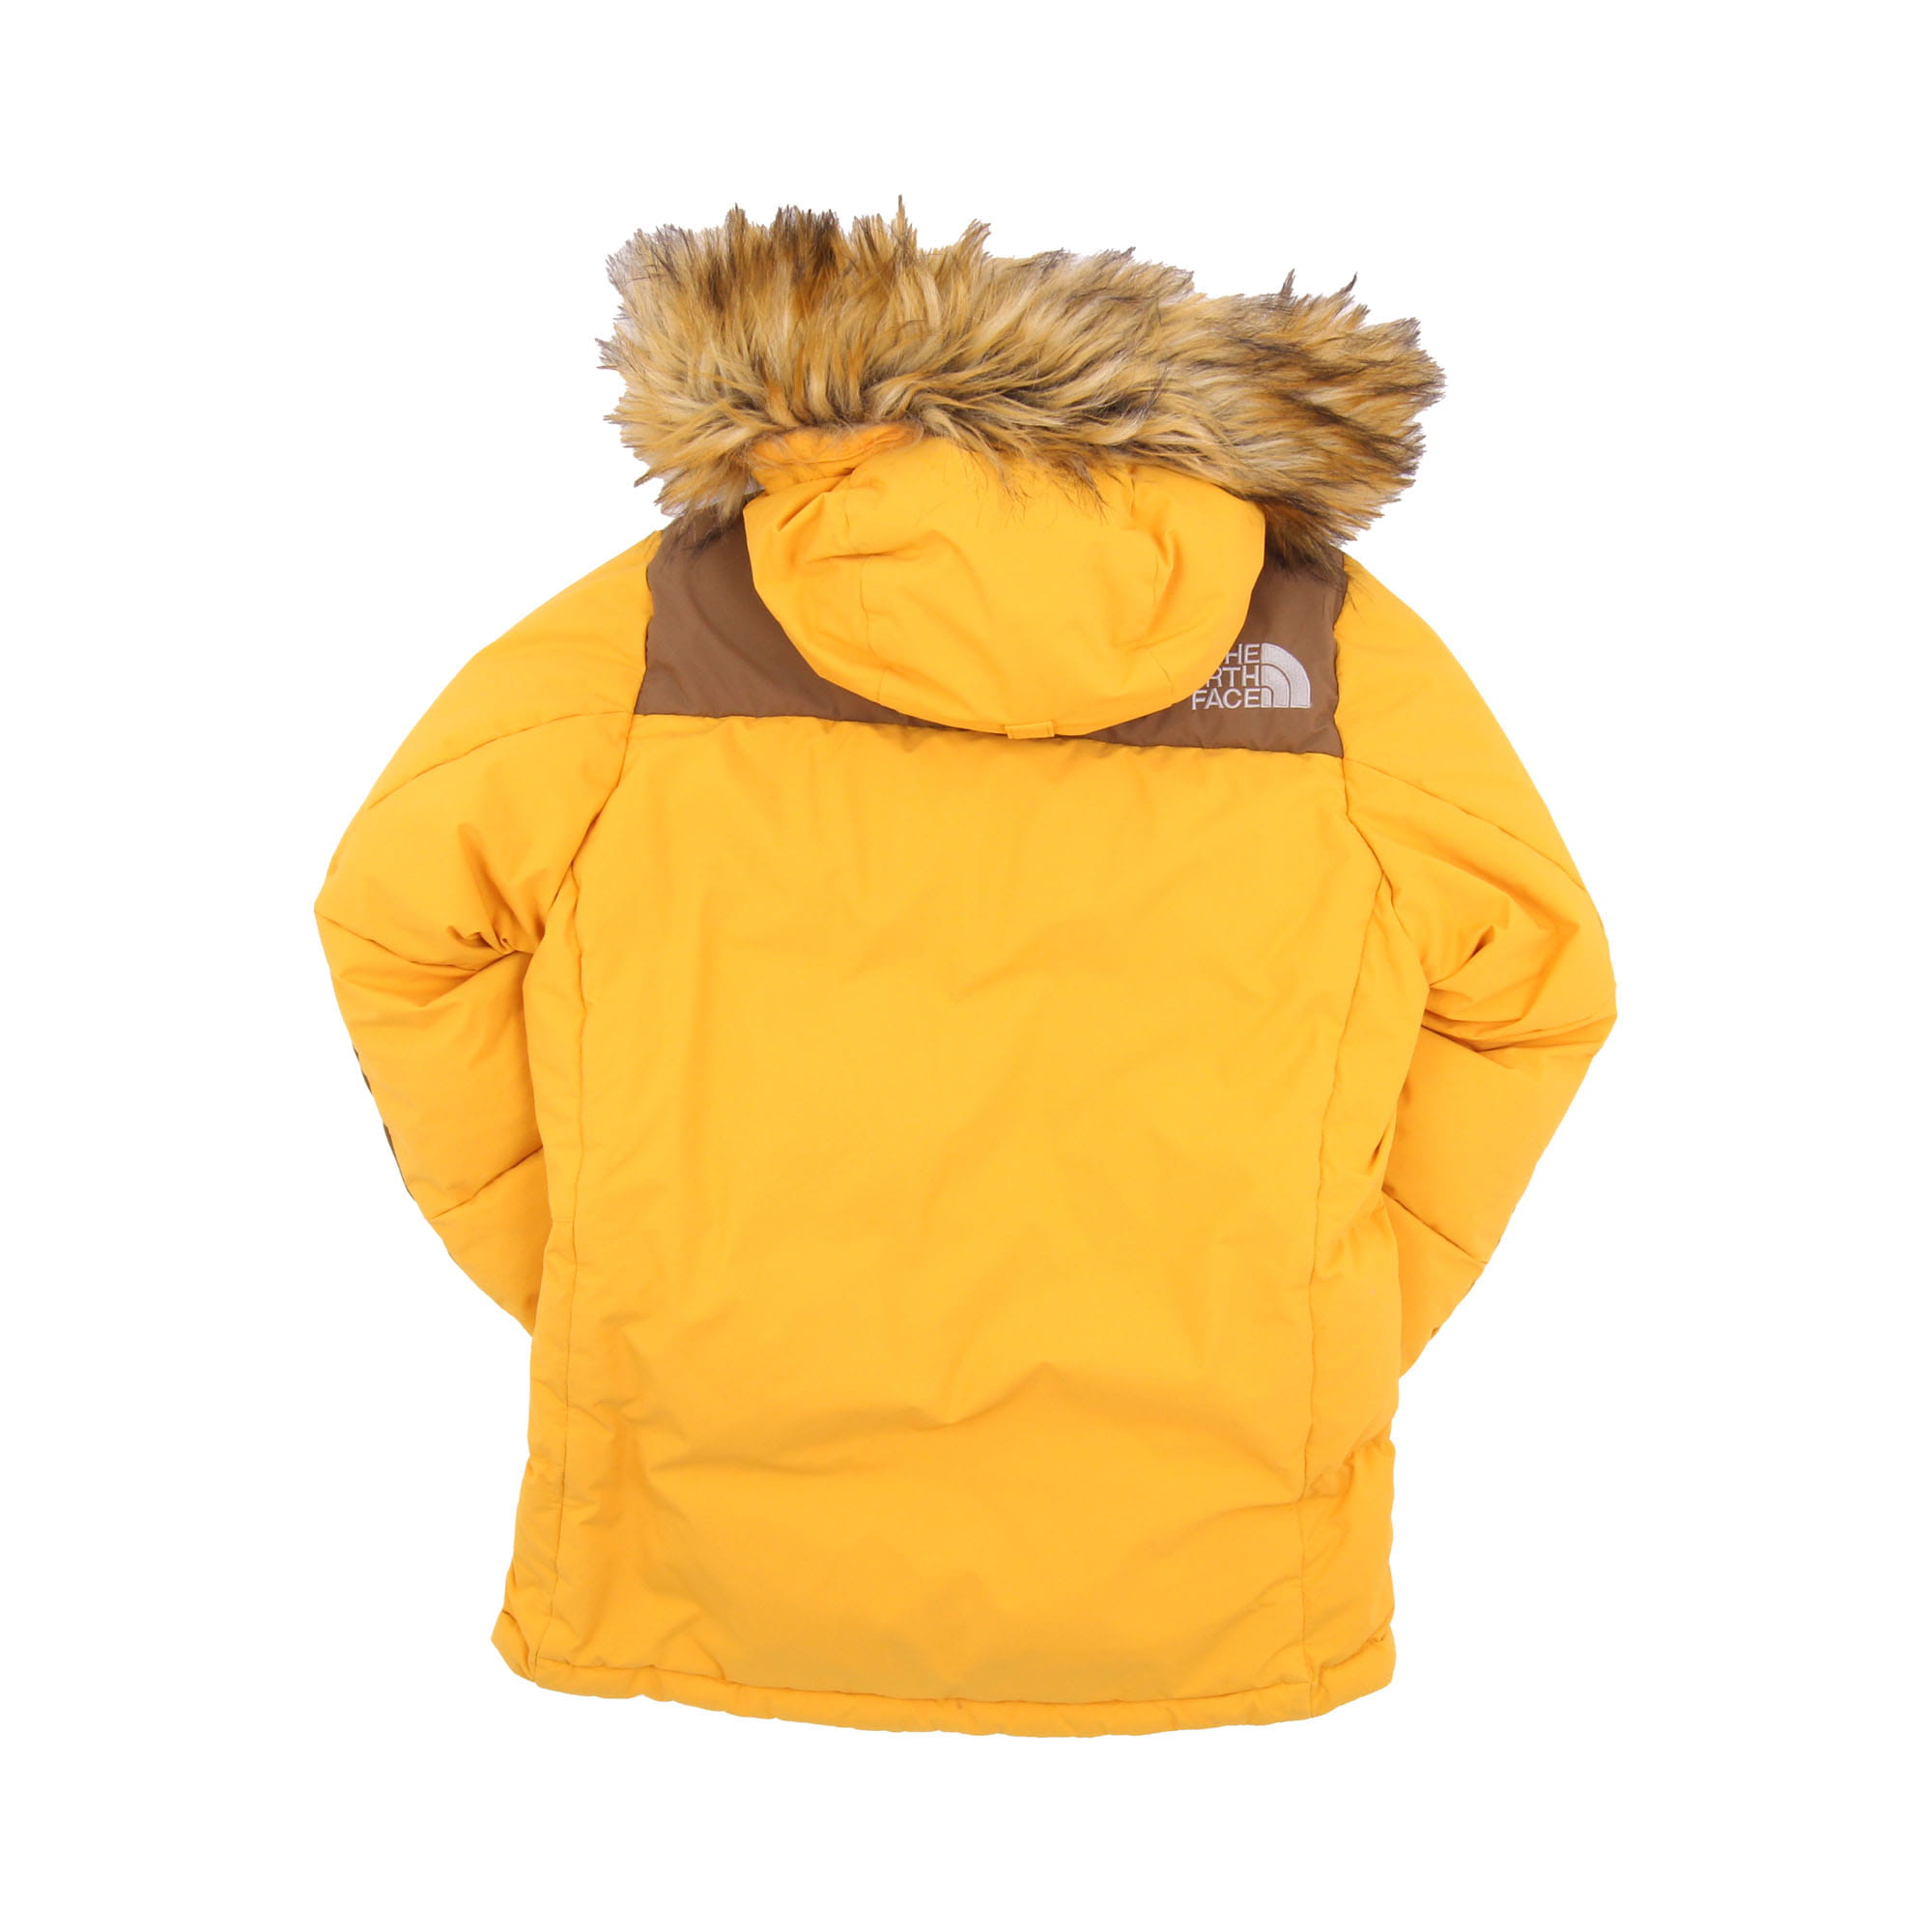 The North Face HYVENT Puffer Jacket Orange -  XS/S